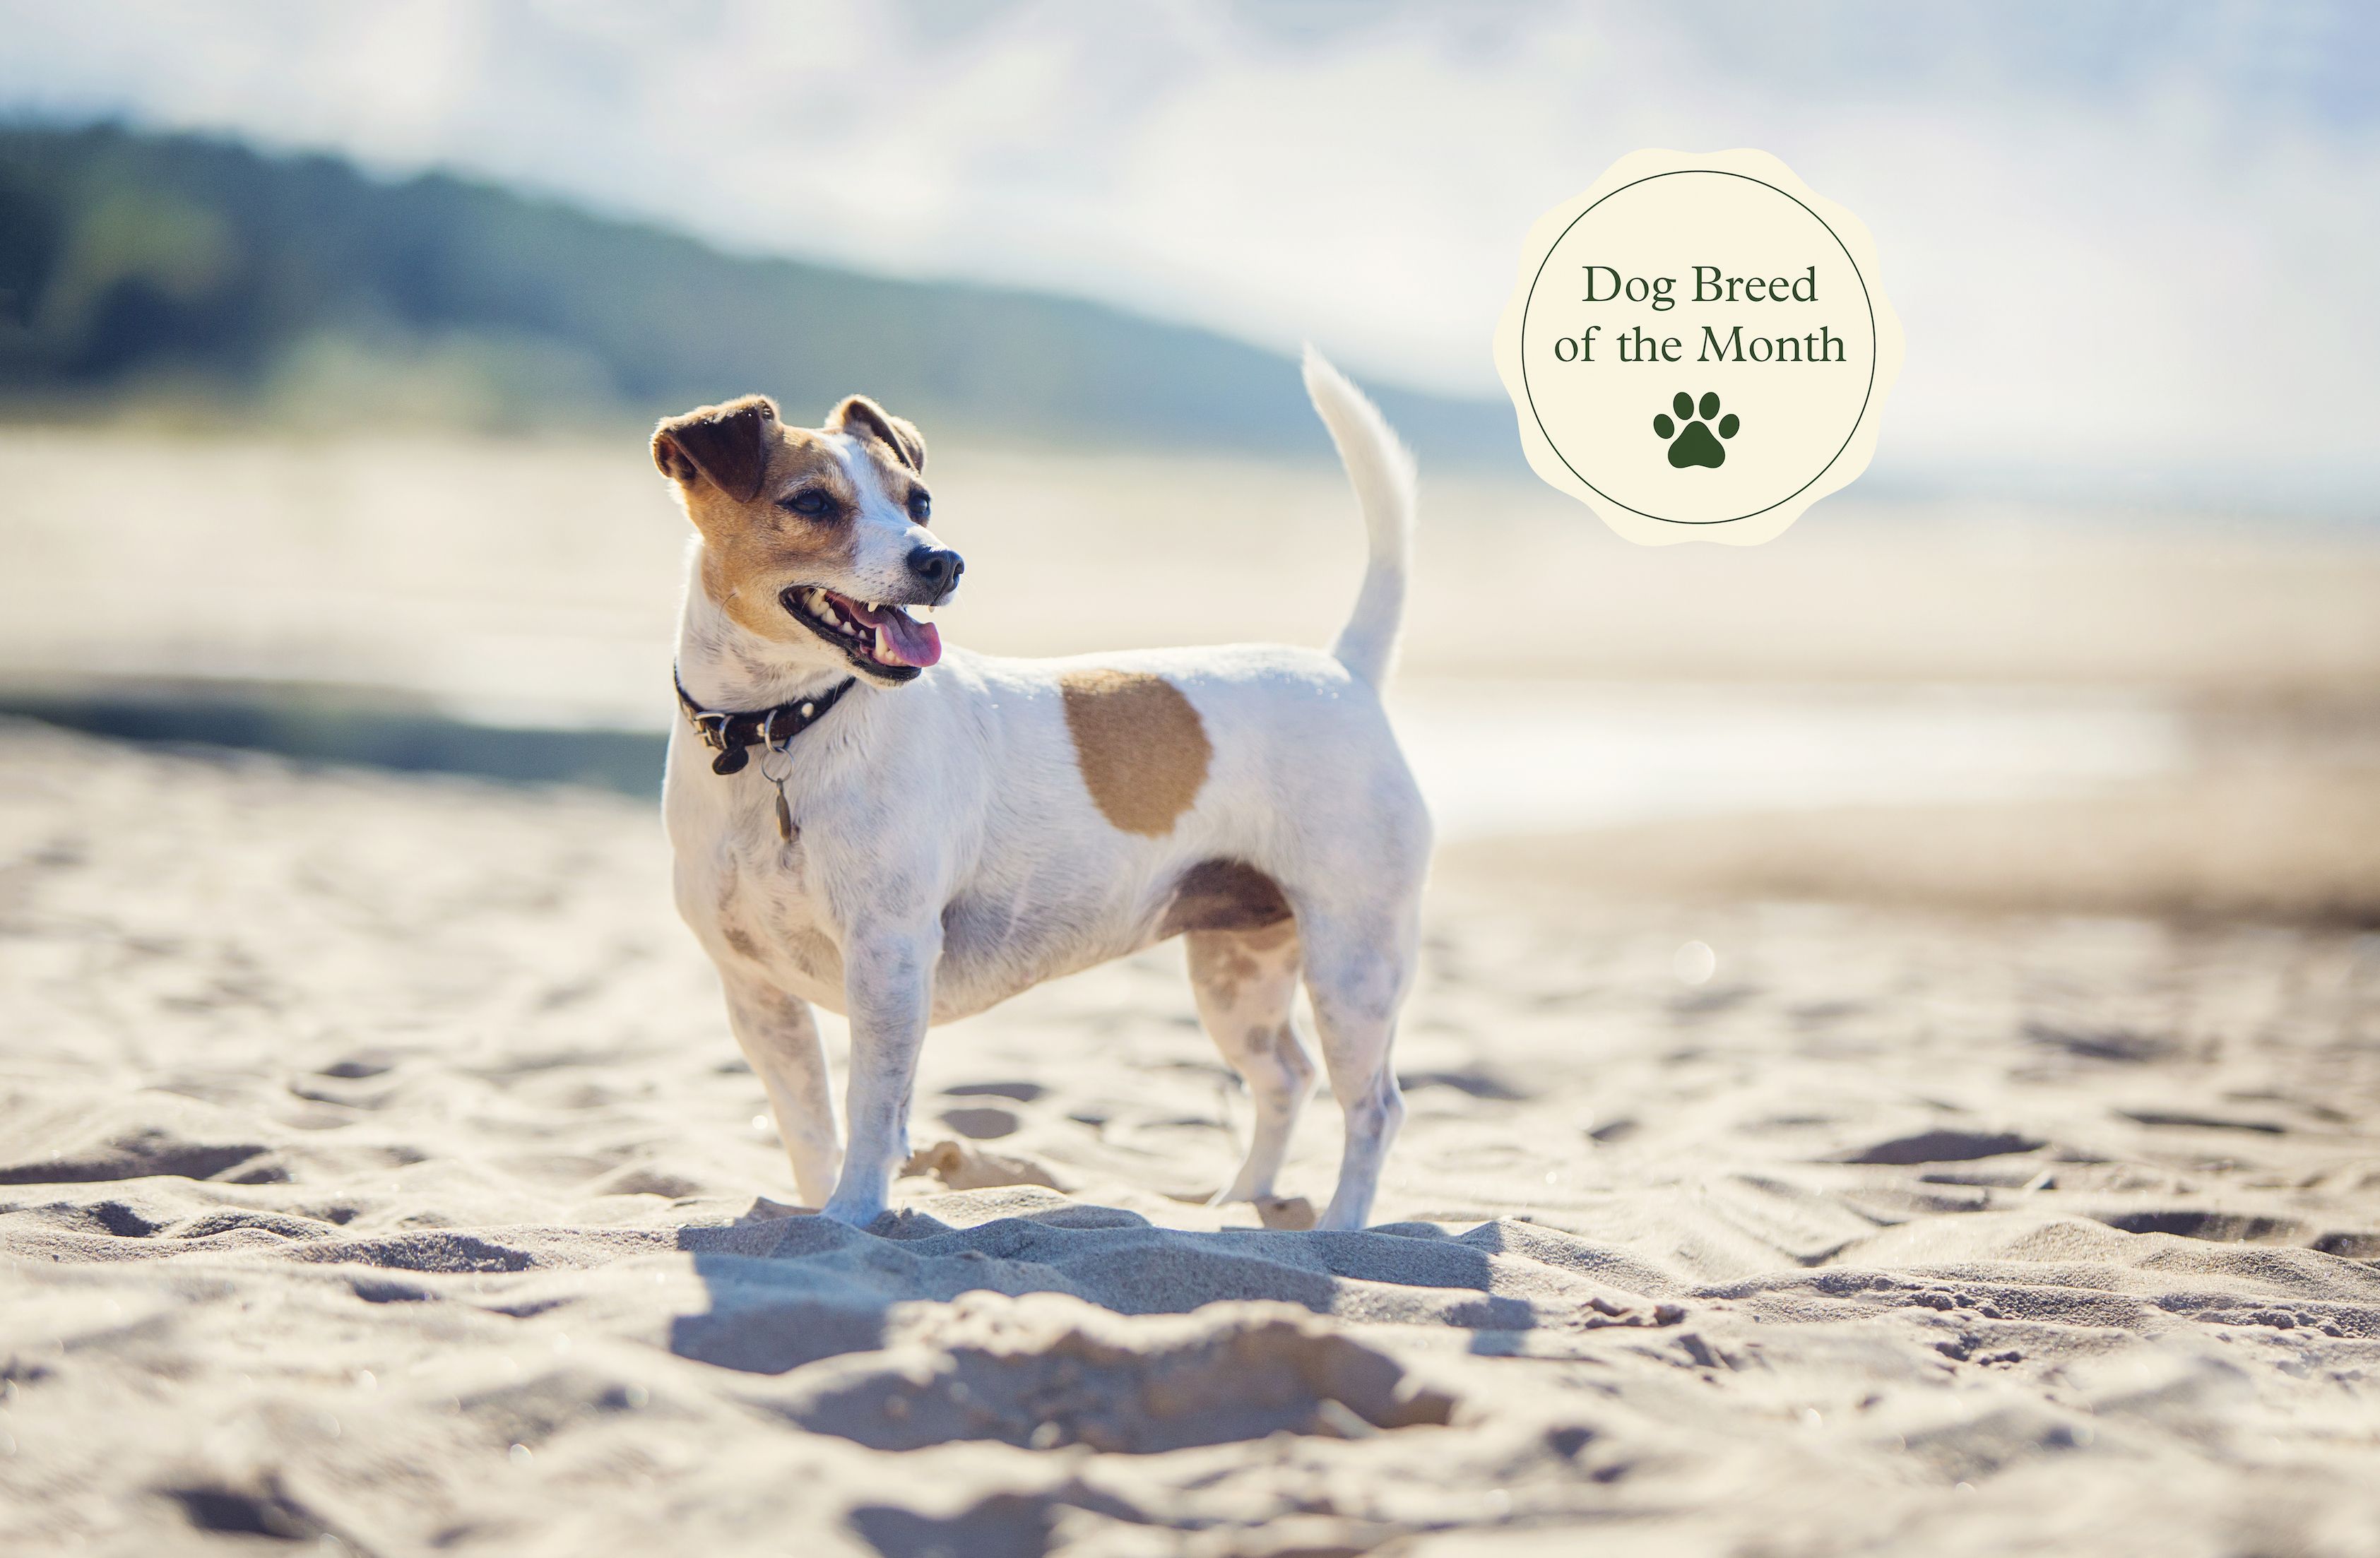 how many types of terrier breeds are there